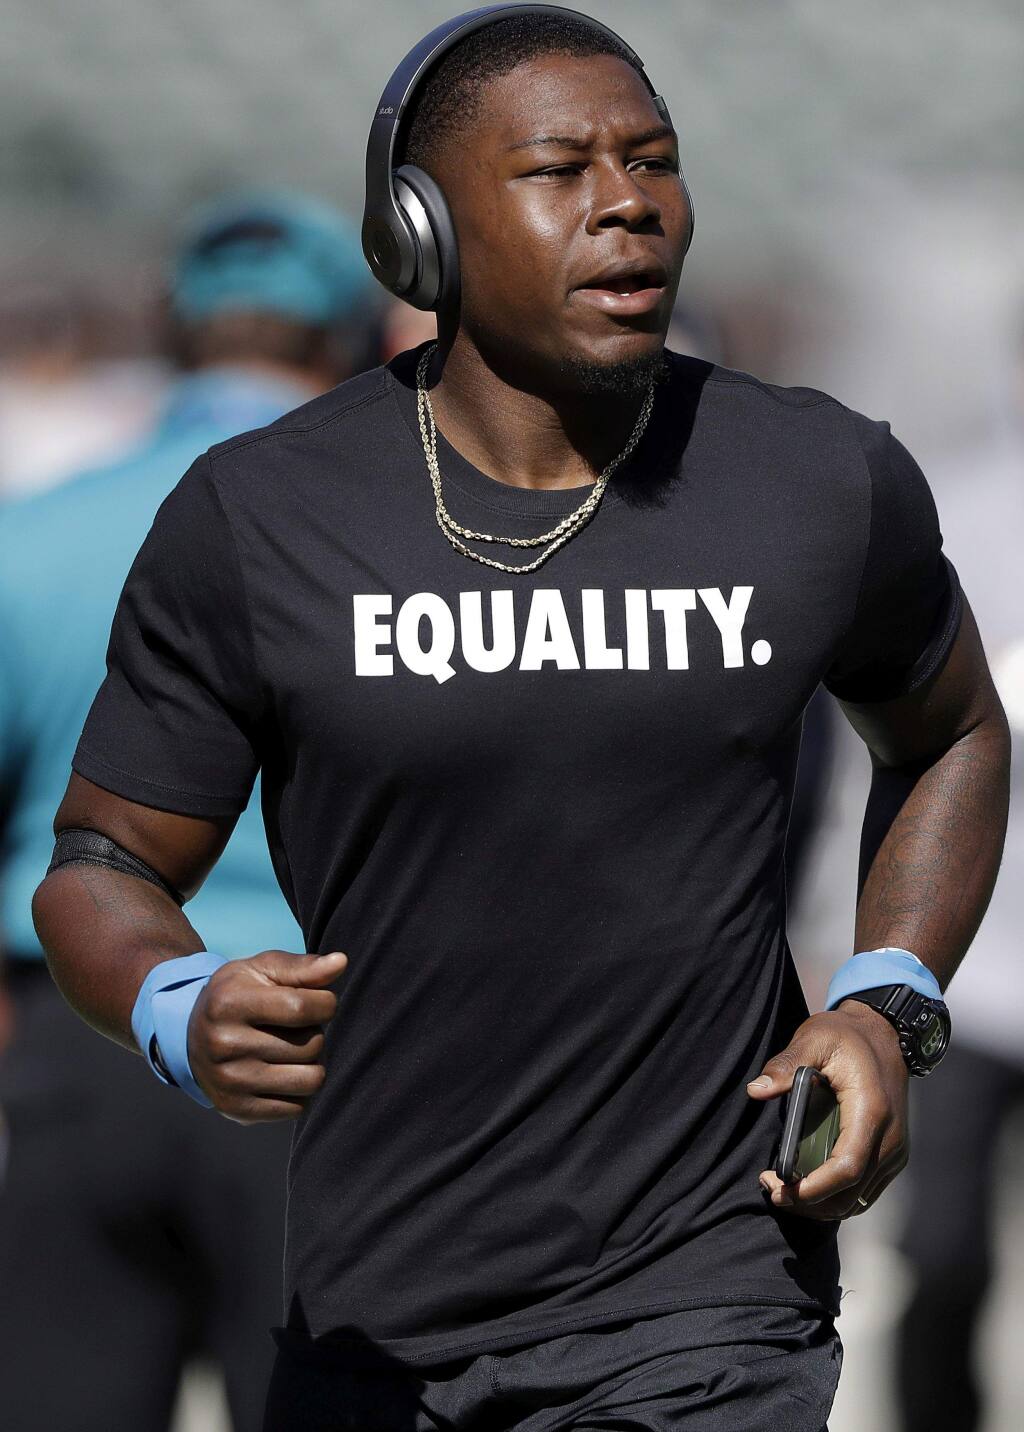 Oakland Raiders cornerback T.J. Carrie wears an Equality shirt while warming up before an NFL football game against the Baltimore Ravens in Oakland, Calif., Sunday, Oct. 8, 2017. (AP Photo/Marcio Jose Sanchez)